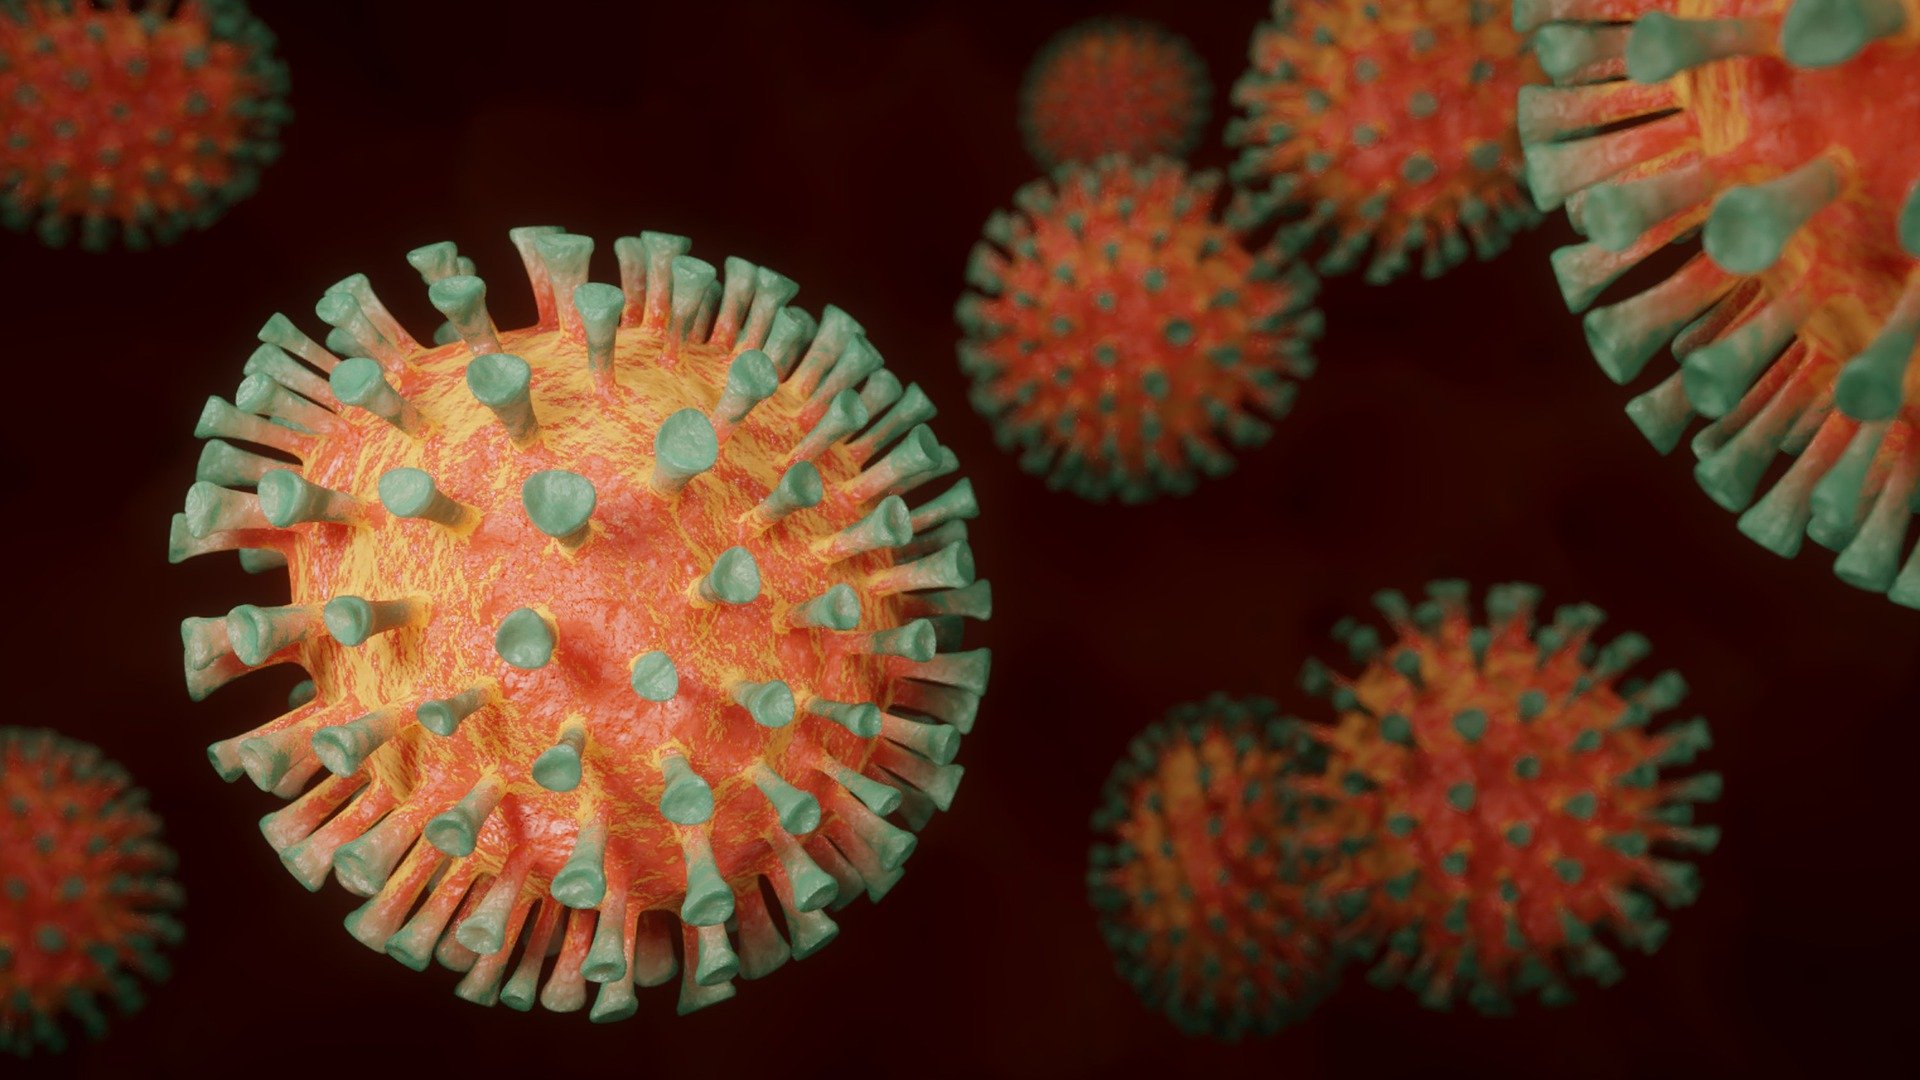 New Coronavirus Variant Detected and Spreading in 12 California Counties